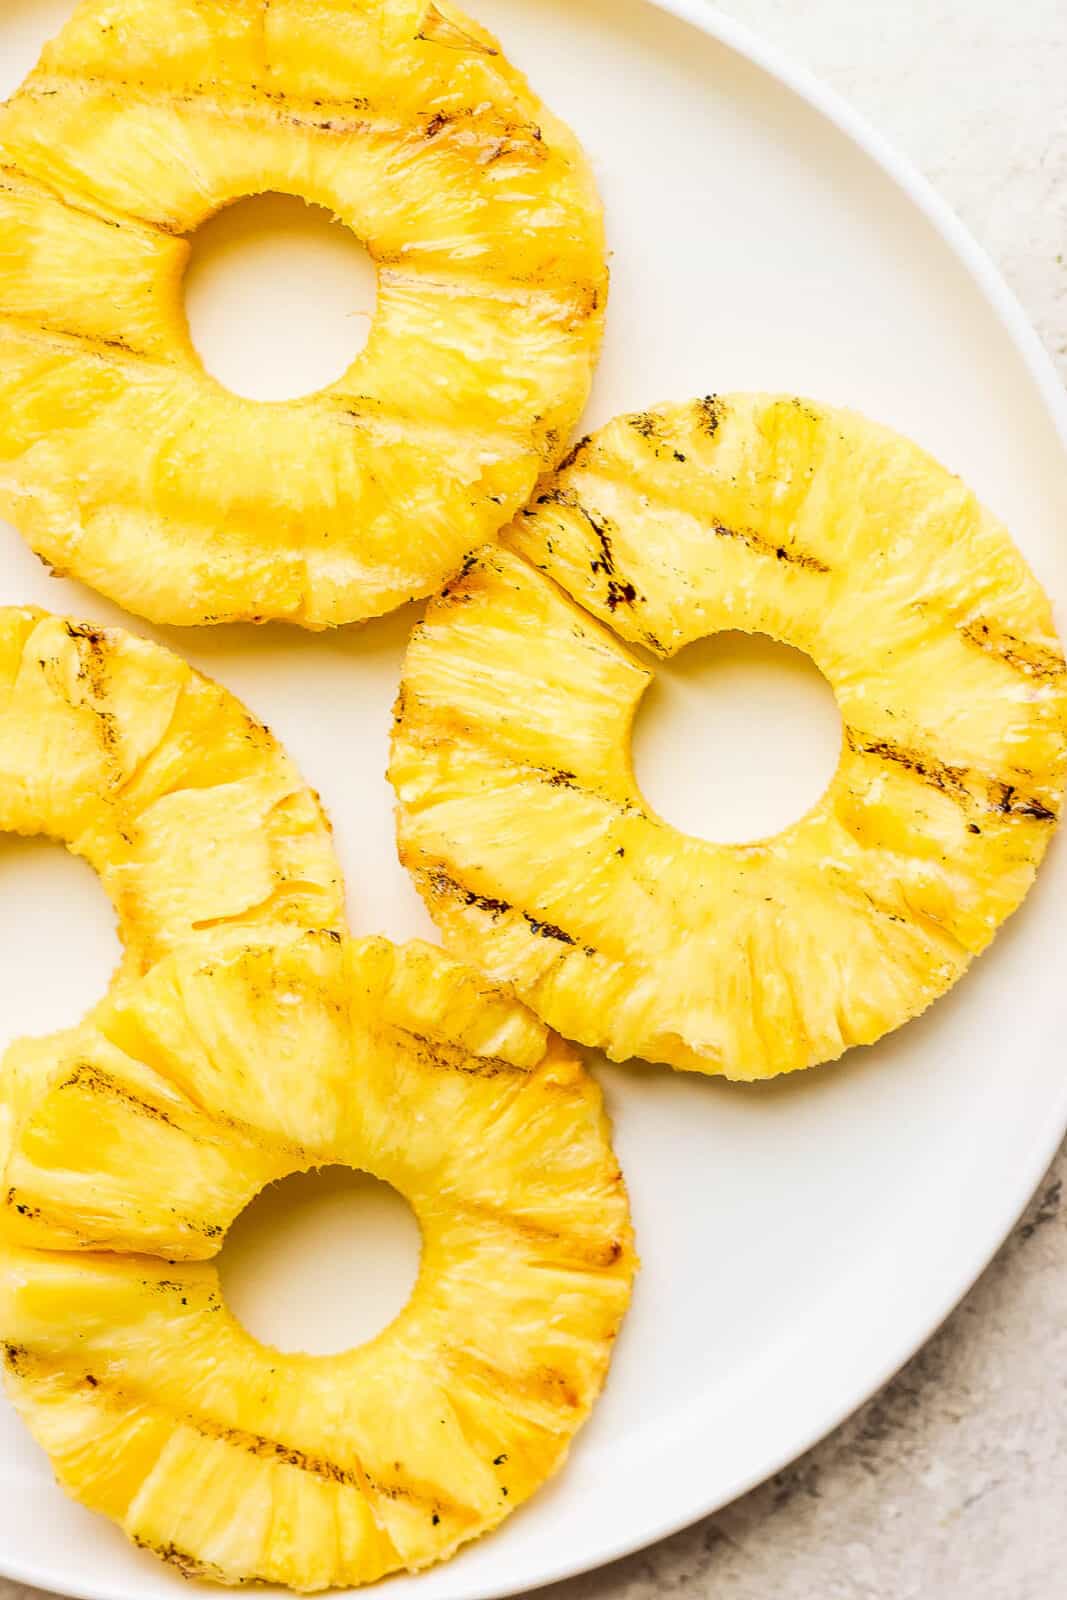 Smoked pineapple slices on a plate.